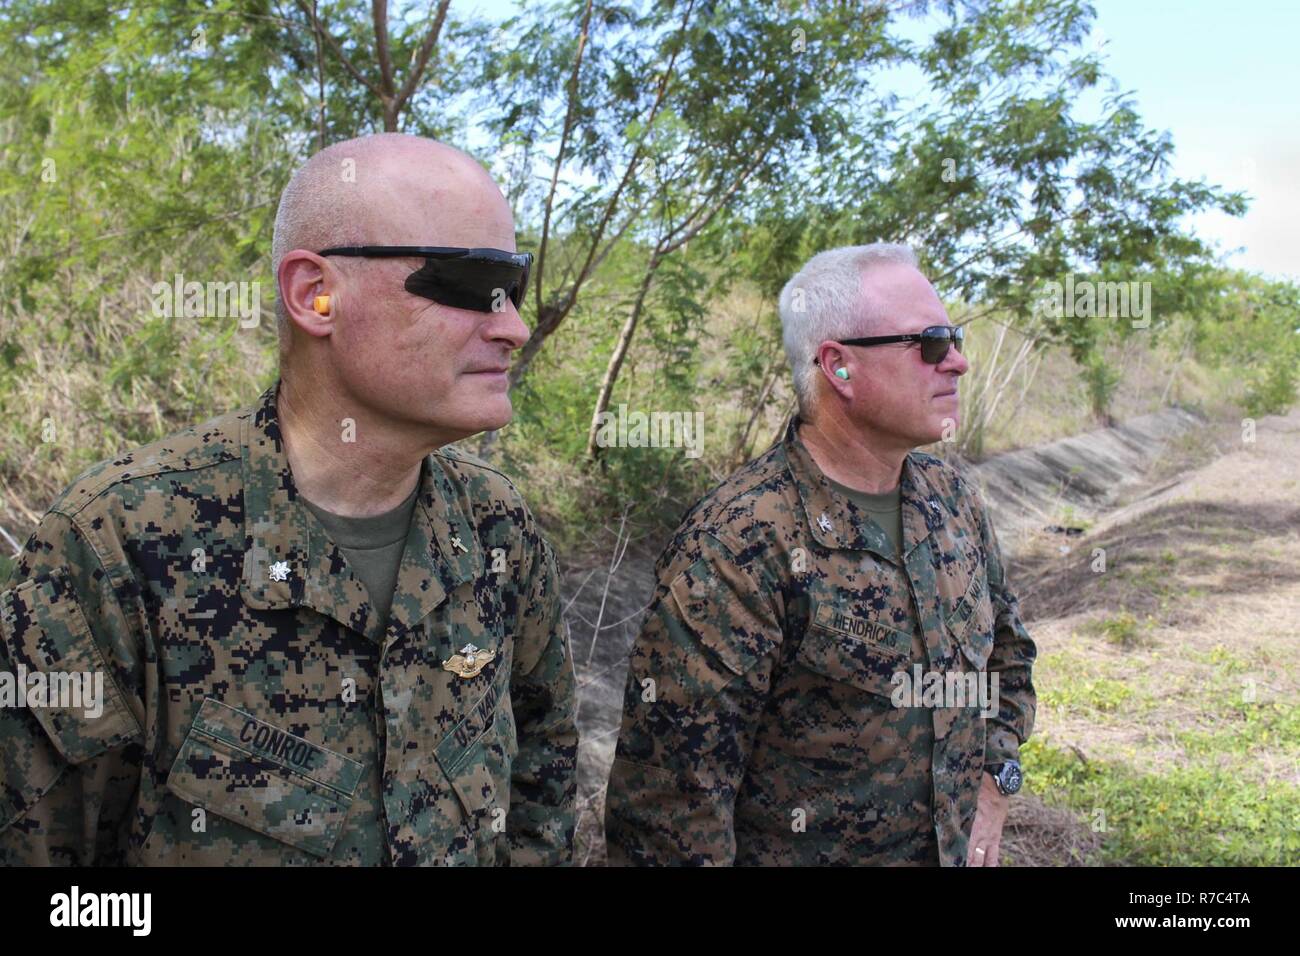 https://c8.alamy.com/comp/R7C4TA/us-navy-cmdr-jon-conroe-deputy-force-chaplain-us-marine-corps-forces-pacific-marforpac-and-capt-mark-hendricks-force-chaplain-marforpac-wait-for-a-uh-60-black-hawk-helicopter-before-flying-to-a-community-relations-event-in-support-of-balikatan-2017-at-fort-magsaysay-in-santa-rosa-nueva-ecija-may-13-2017-balikatan-is-an-annual-us-philippine-bilateral-military-exercise-focused-on-a-variety-of-missions-including-humanitarian-and-disaster-relief-counterterrorism-and-other-combined-military-operations-R7C4TA.jpg